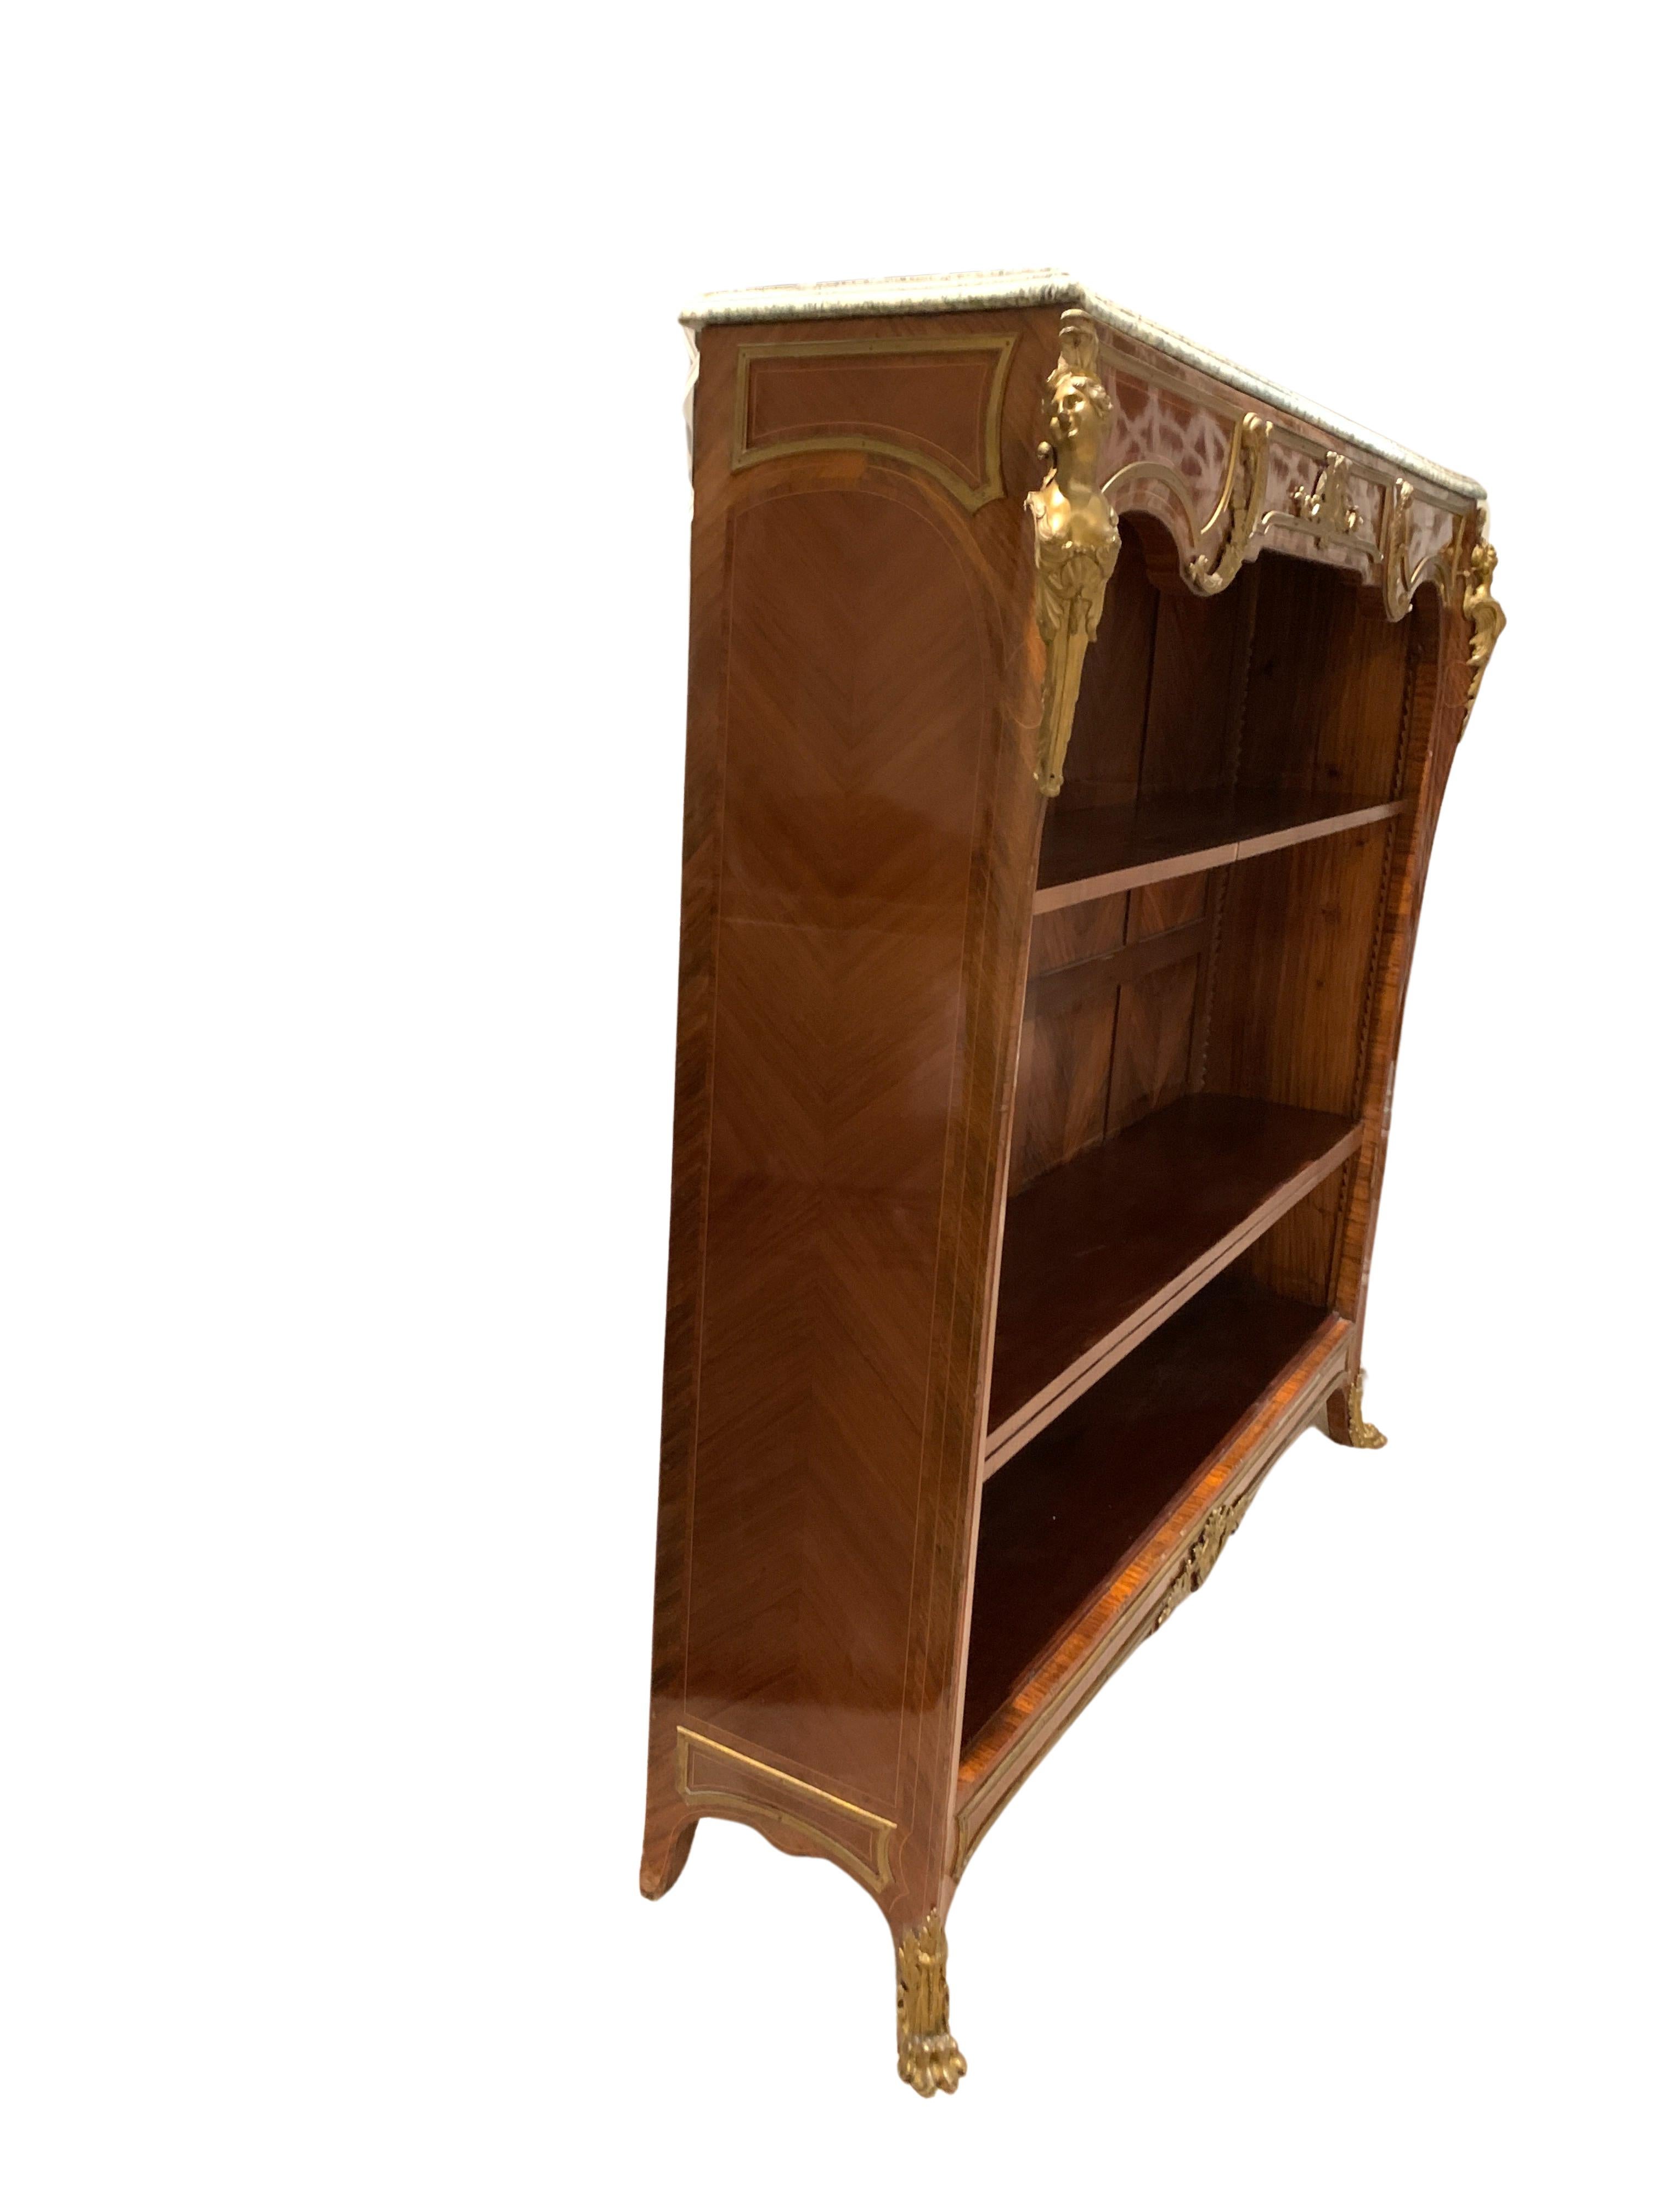 French Ormolu-Mounted Kingwood Bibliotheque For Sale 2